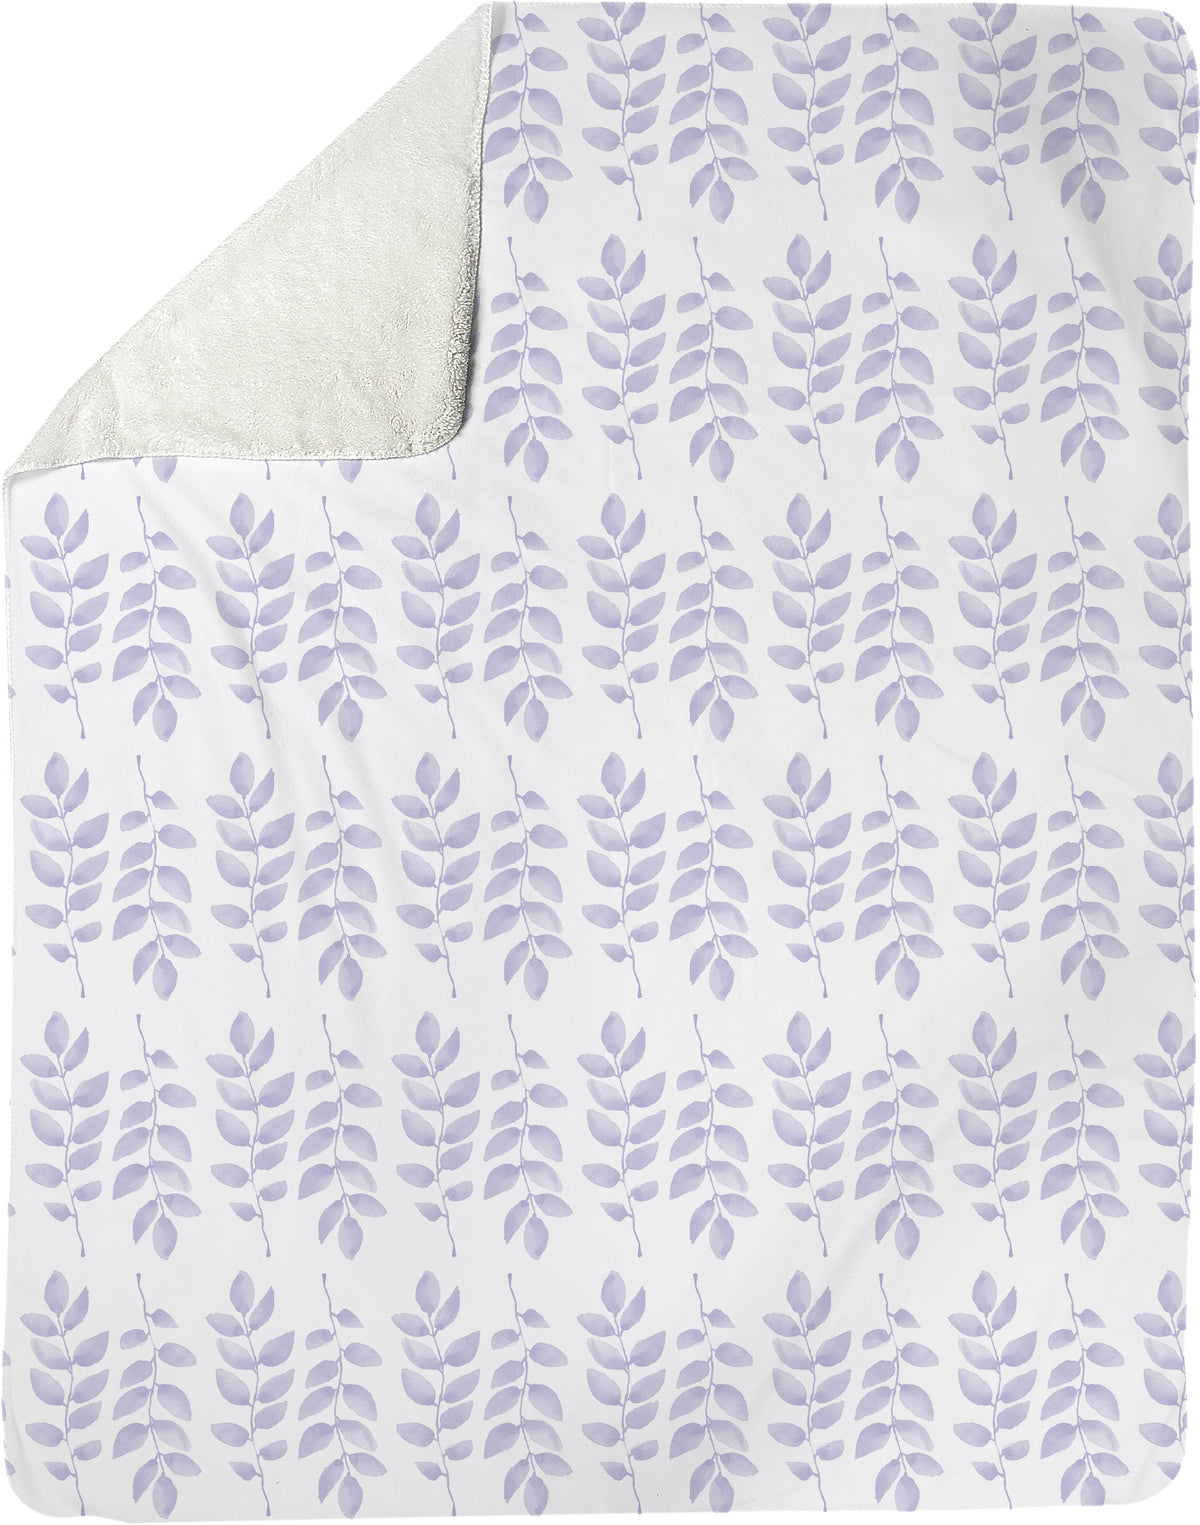 The Lovleigh Blanket - Foliage Lavender Bedding, Blankets MWW 